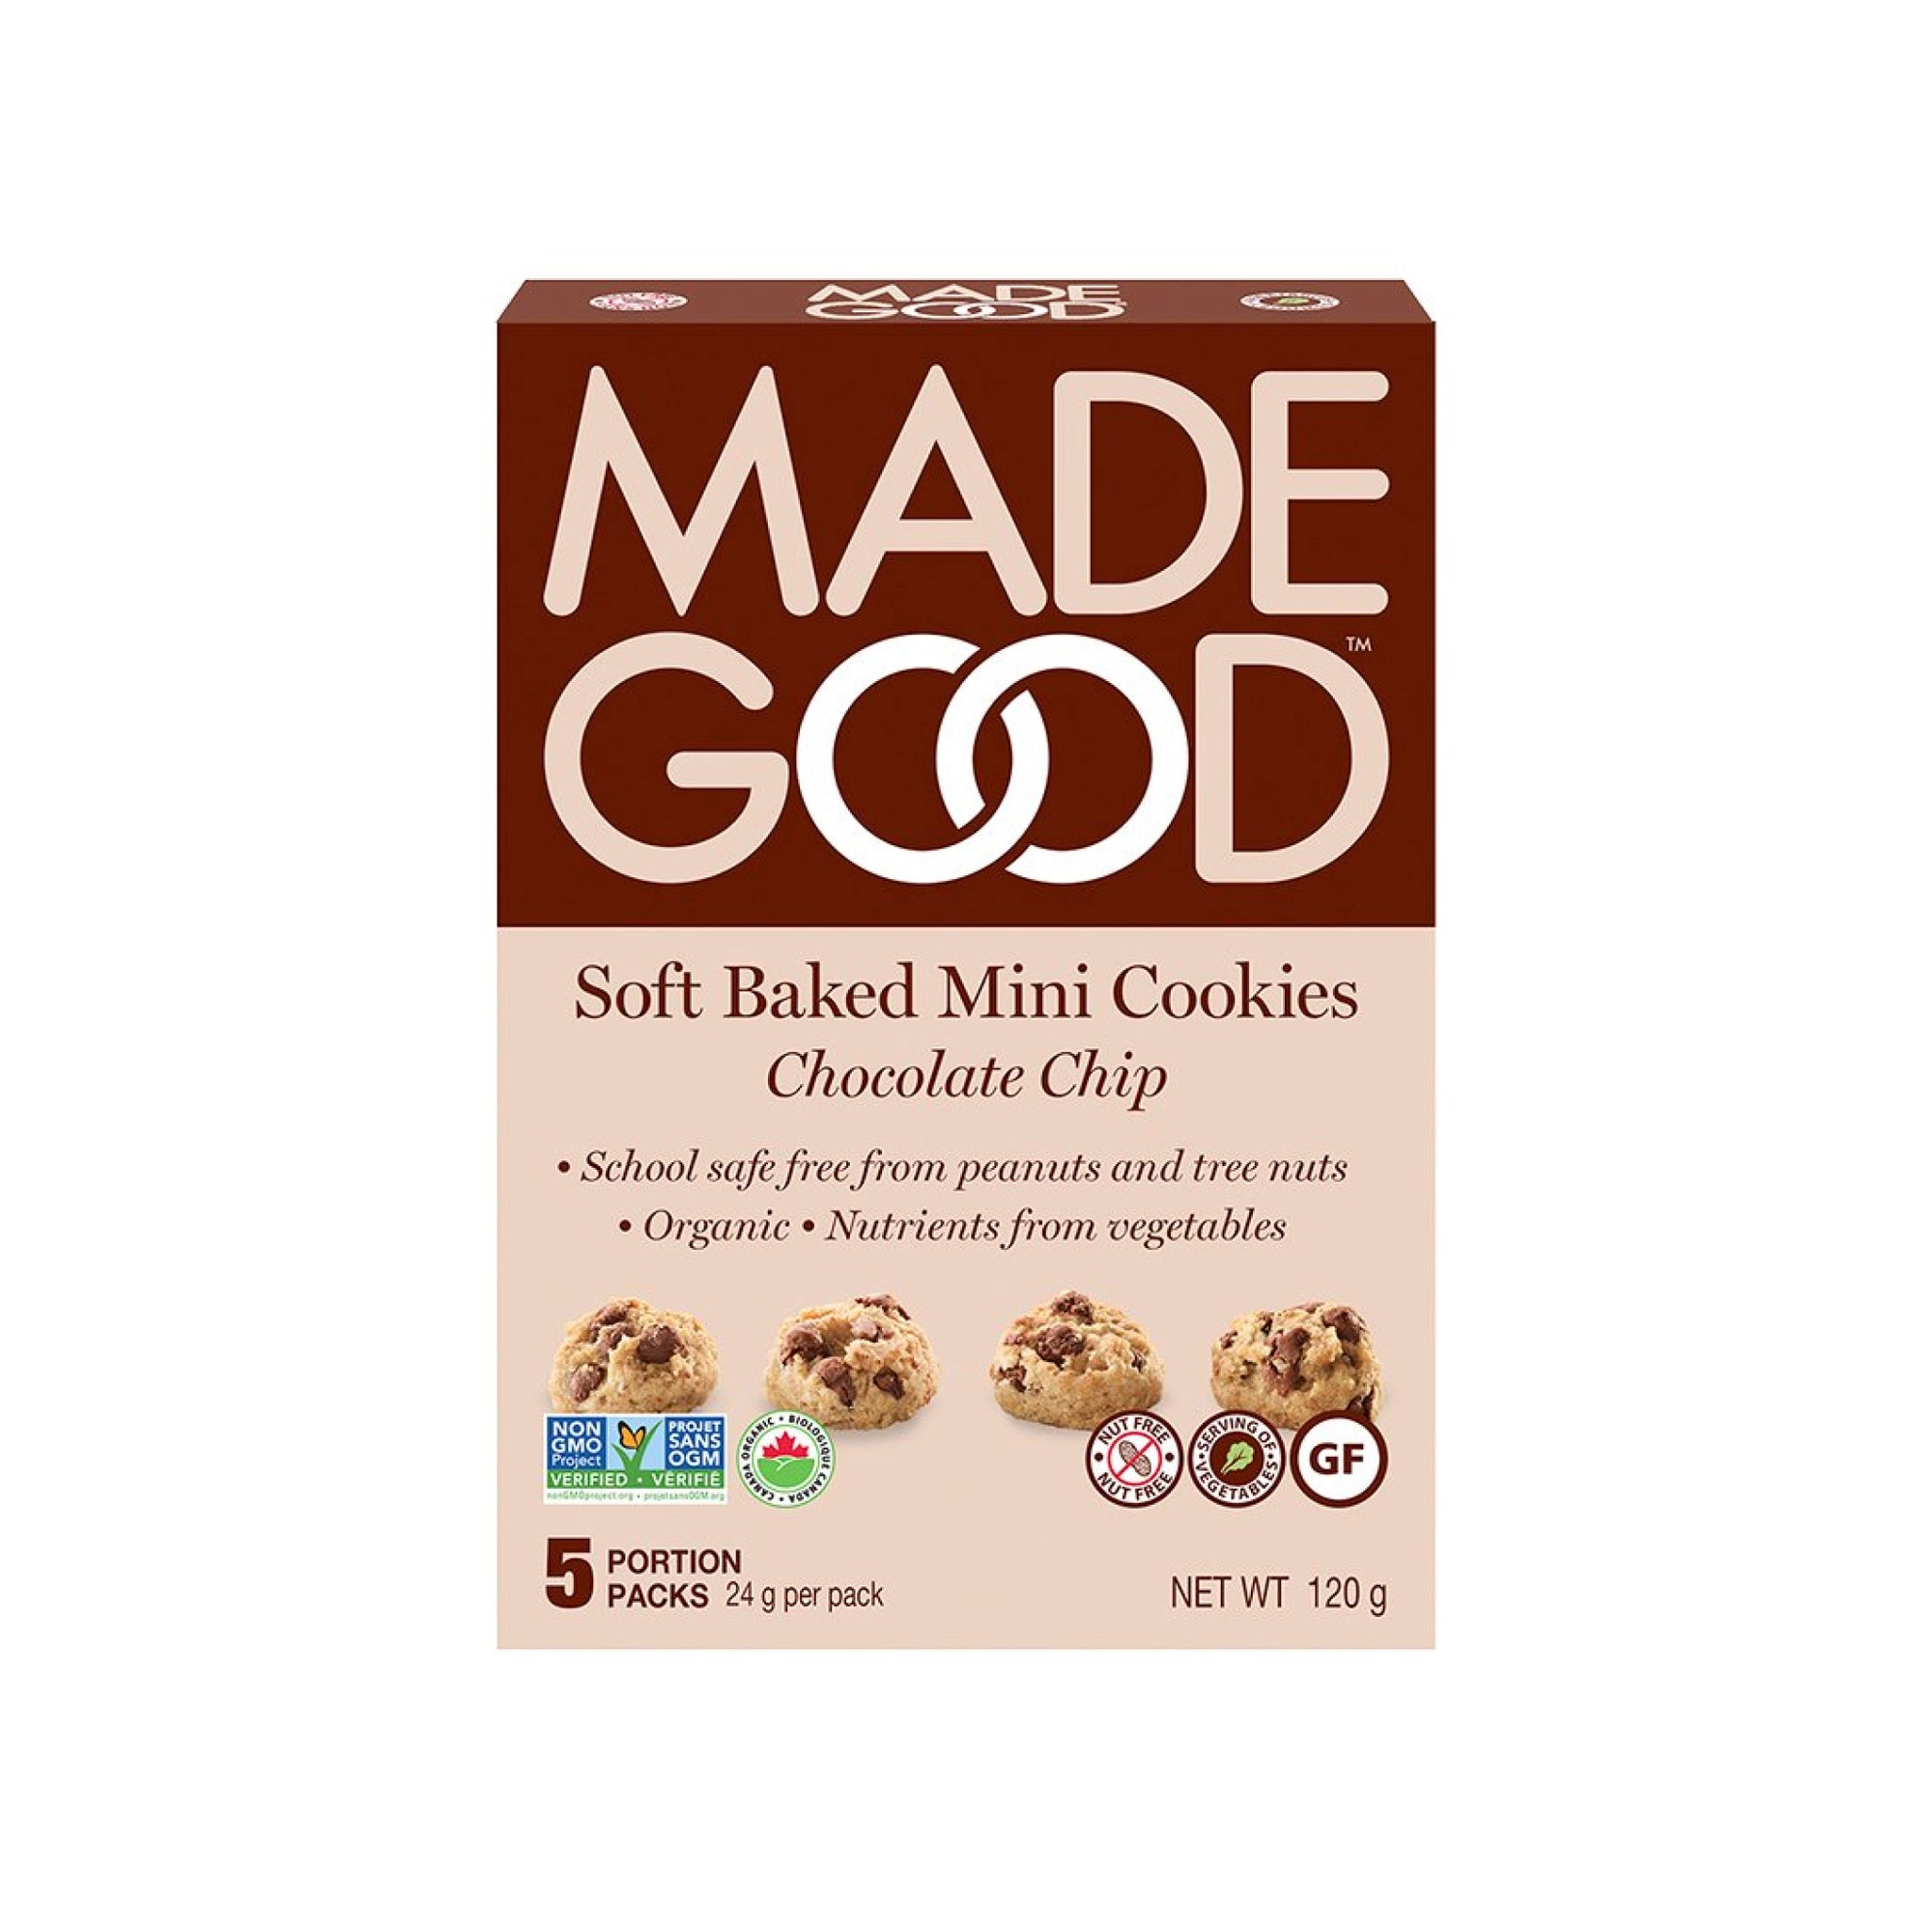 Made Good Chocolate Chip Soft Baked Mini Cookies 120g